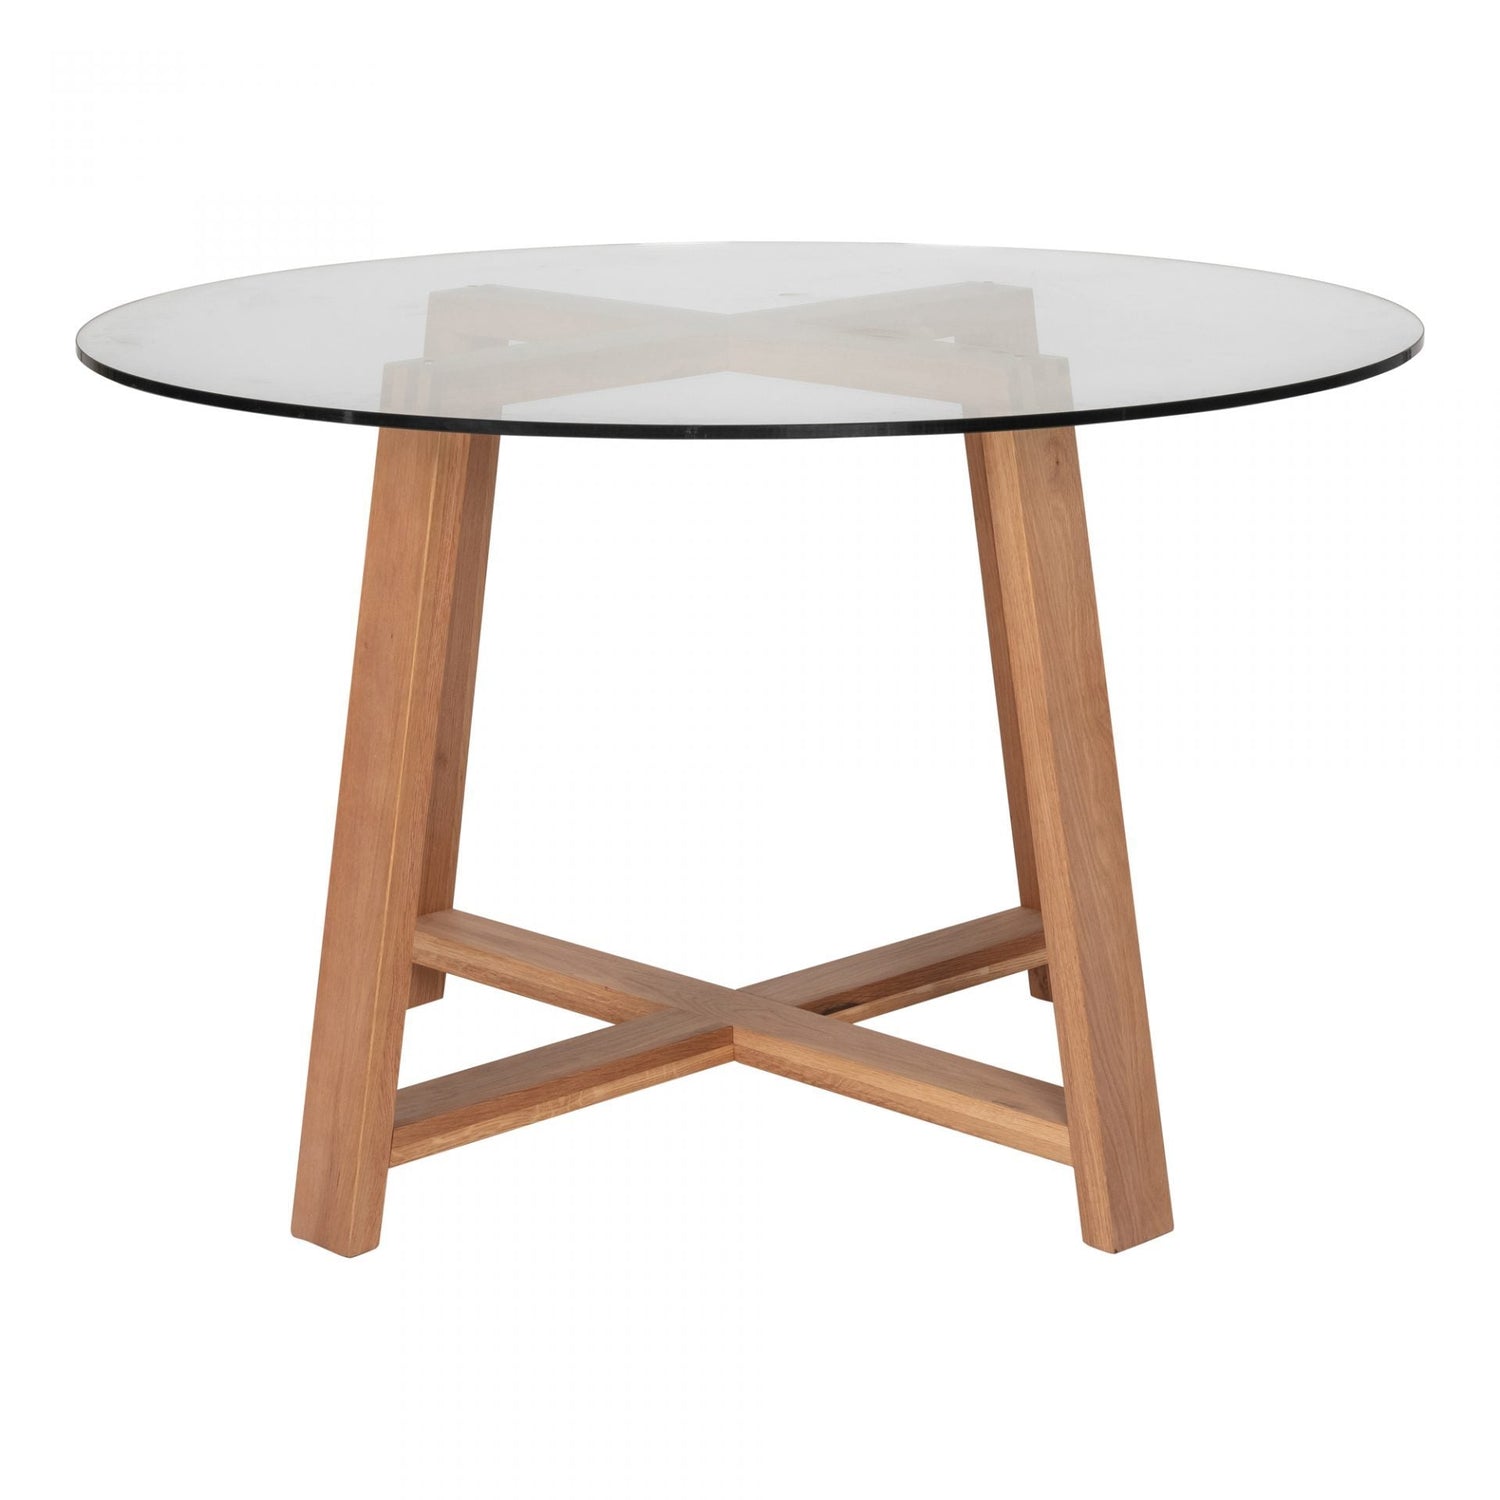 Maleo Round Dining Table: Round Dining Charm